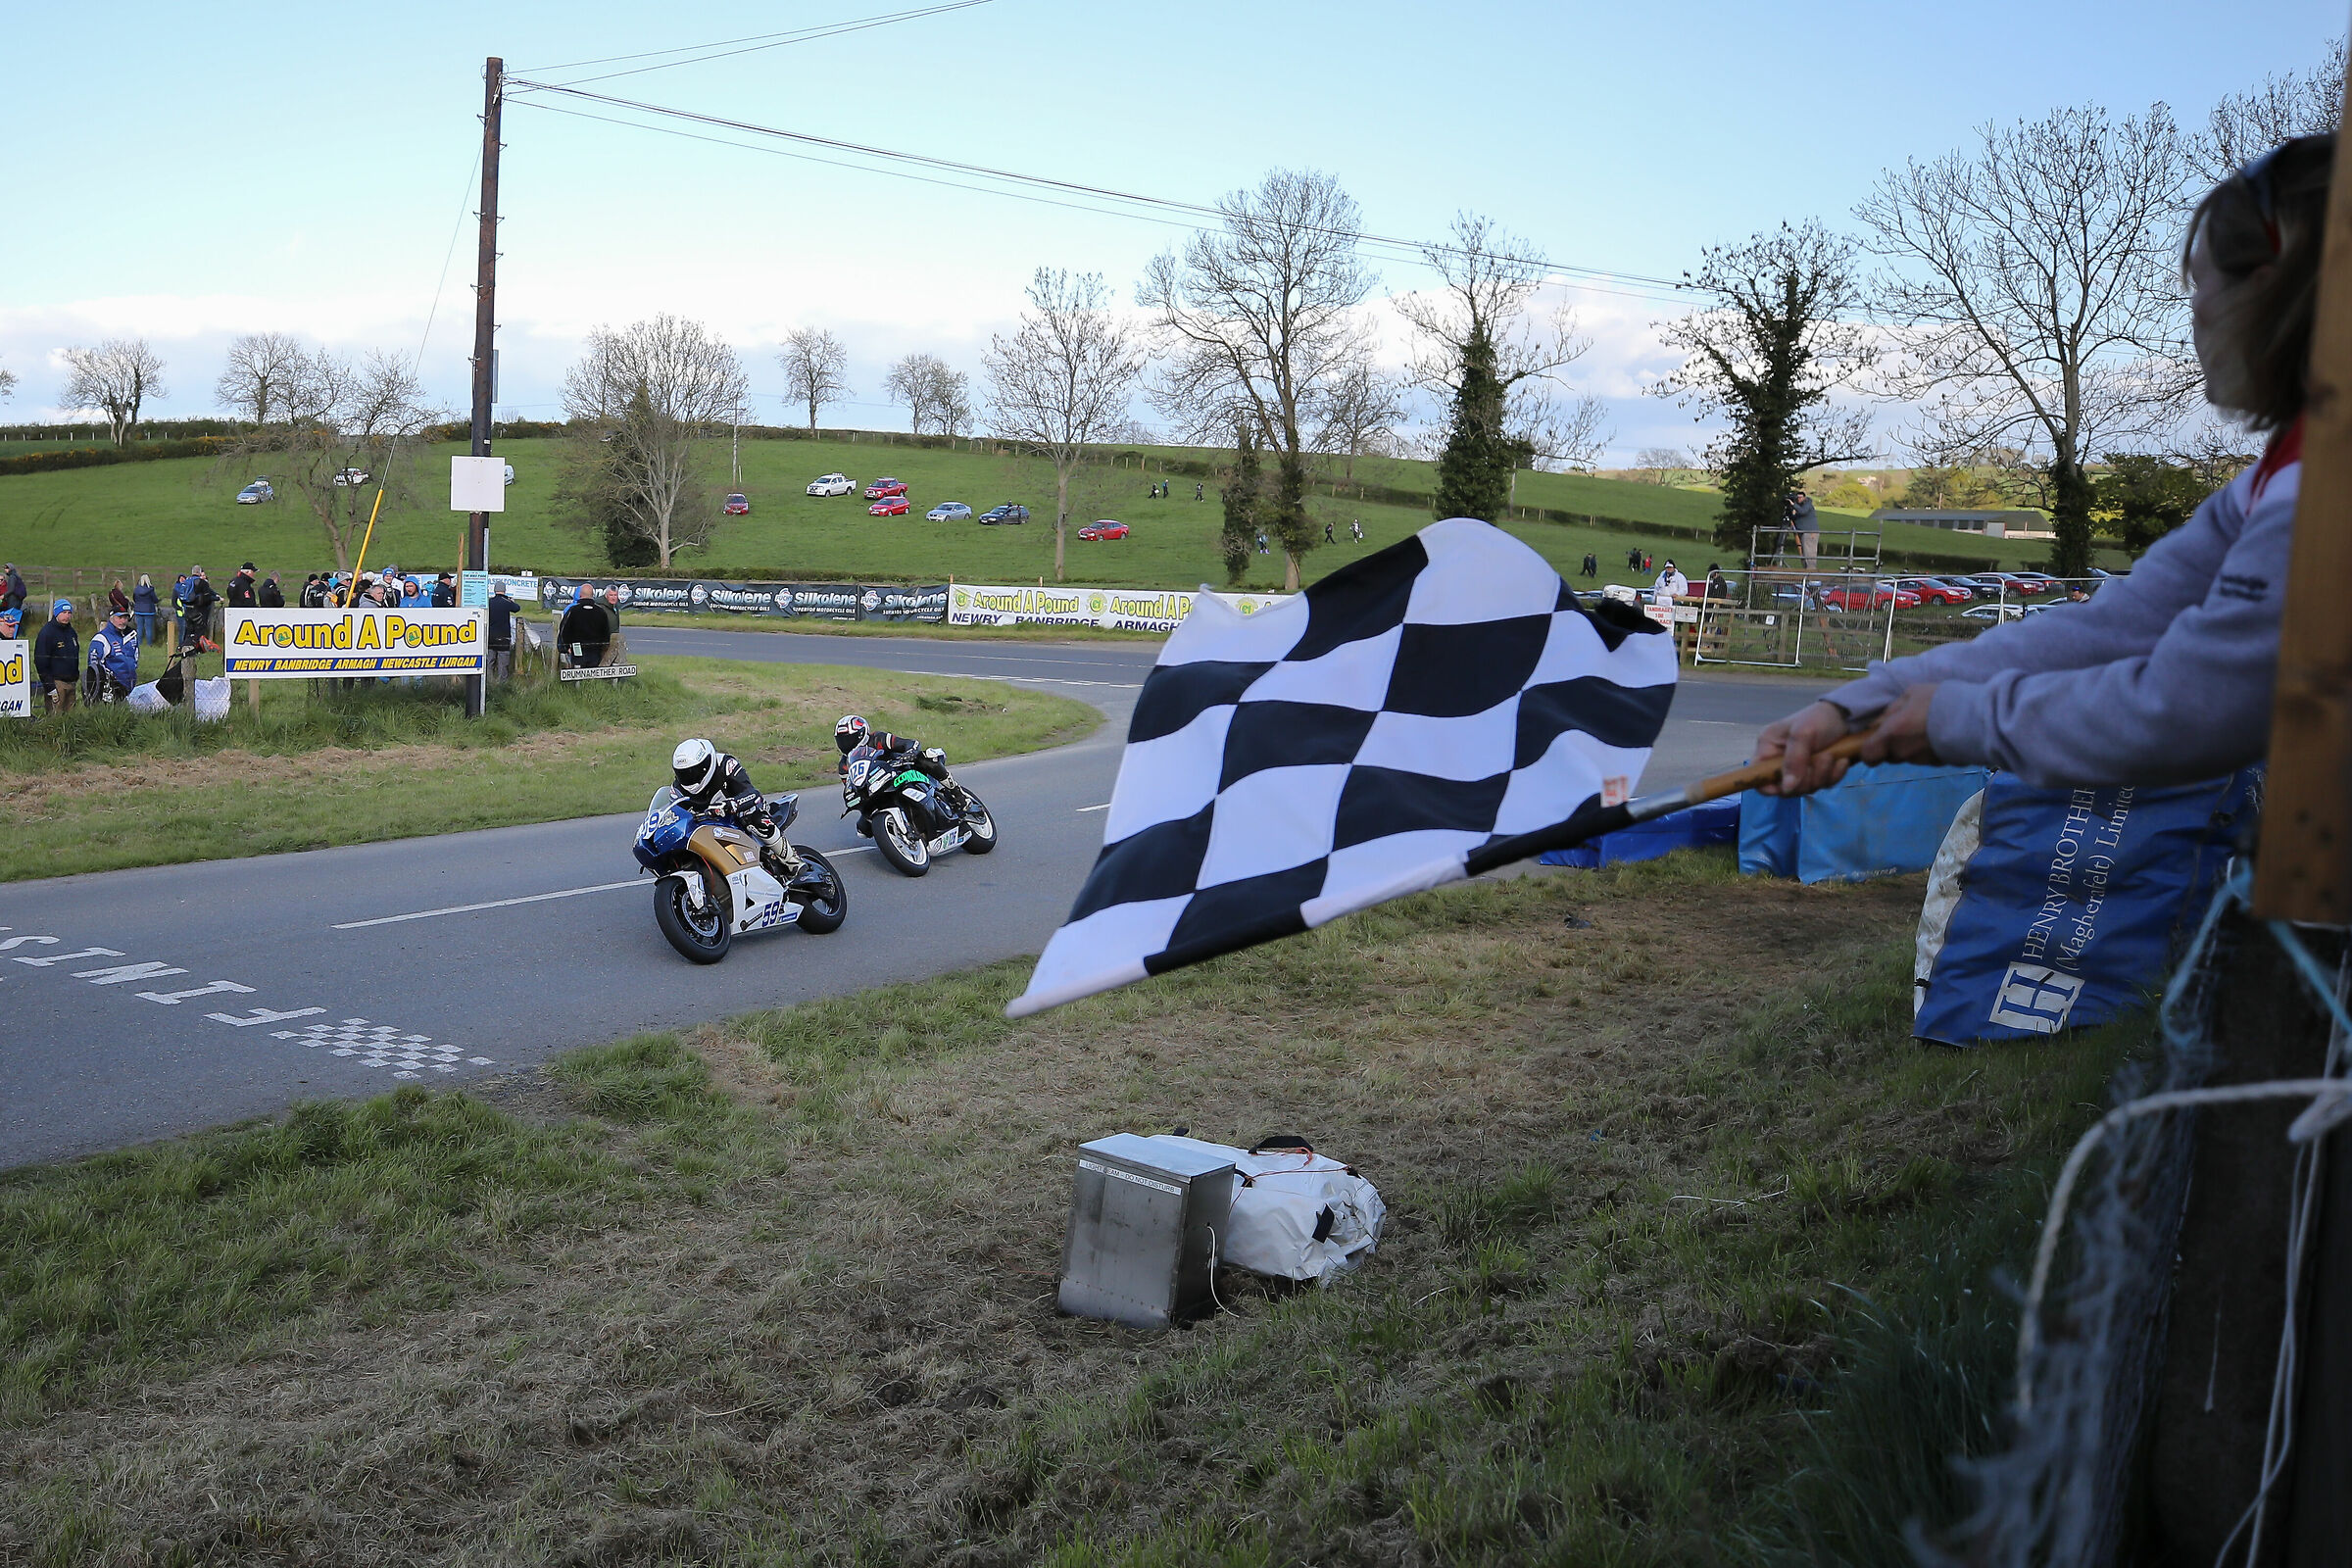 Tandragee 100...